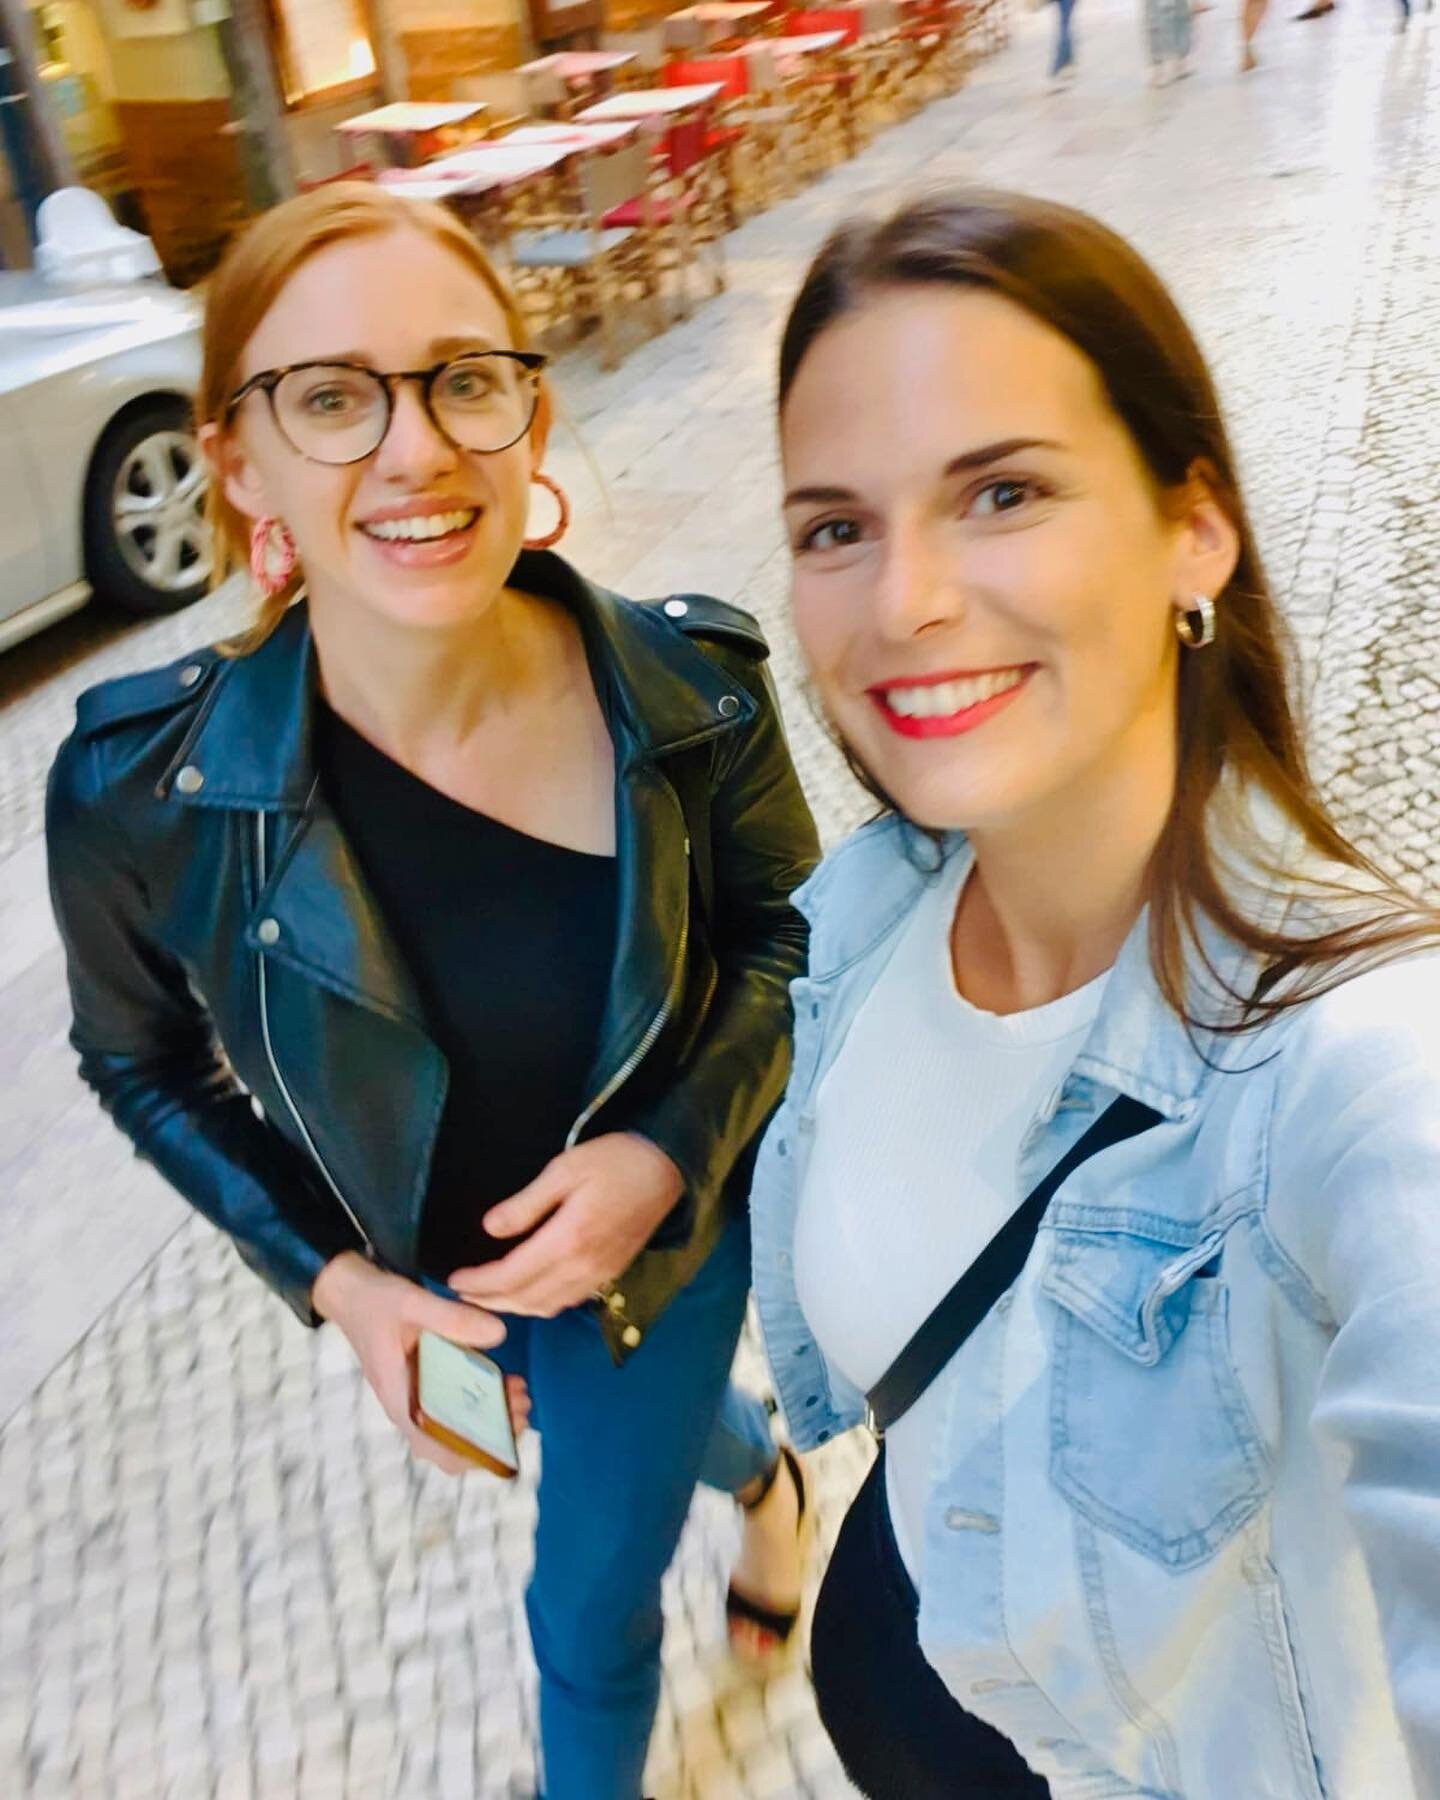 We met on BUMBLE 🐝 
True story: when I first officially moved to Hamburg, I was struggling to break out of the English-speaking, expat bubble and make connections with actual Germans. Enter Bumble BFF. 
After a few friend dates and bike adventures t